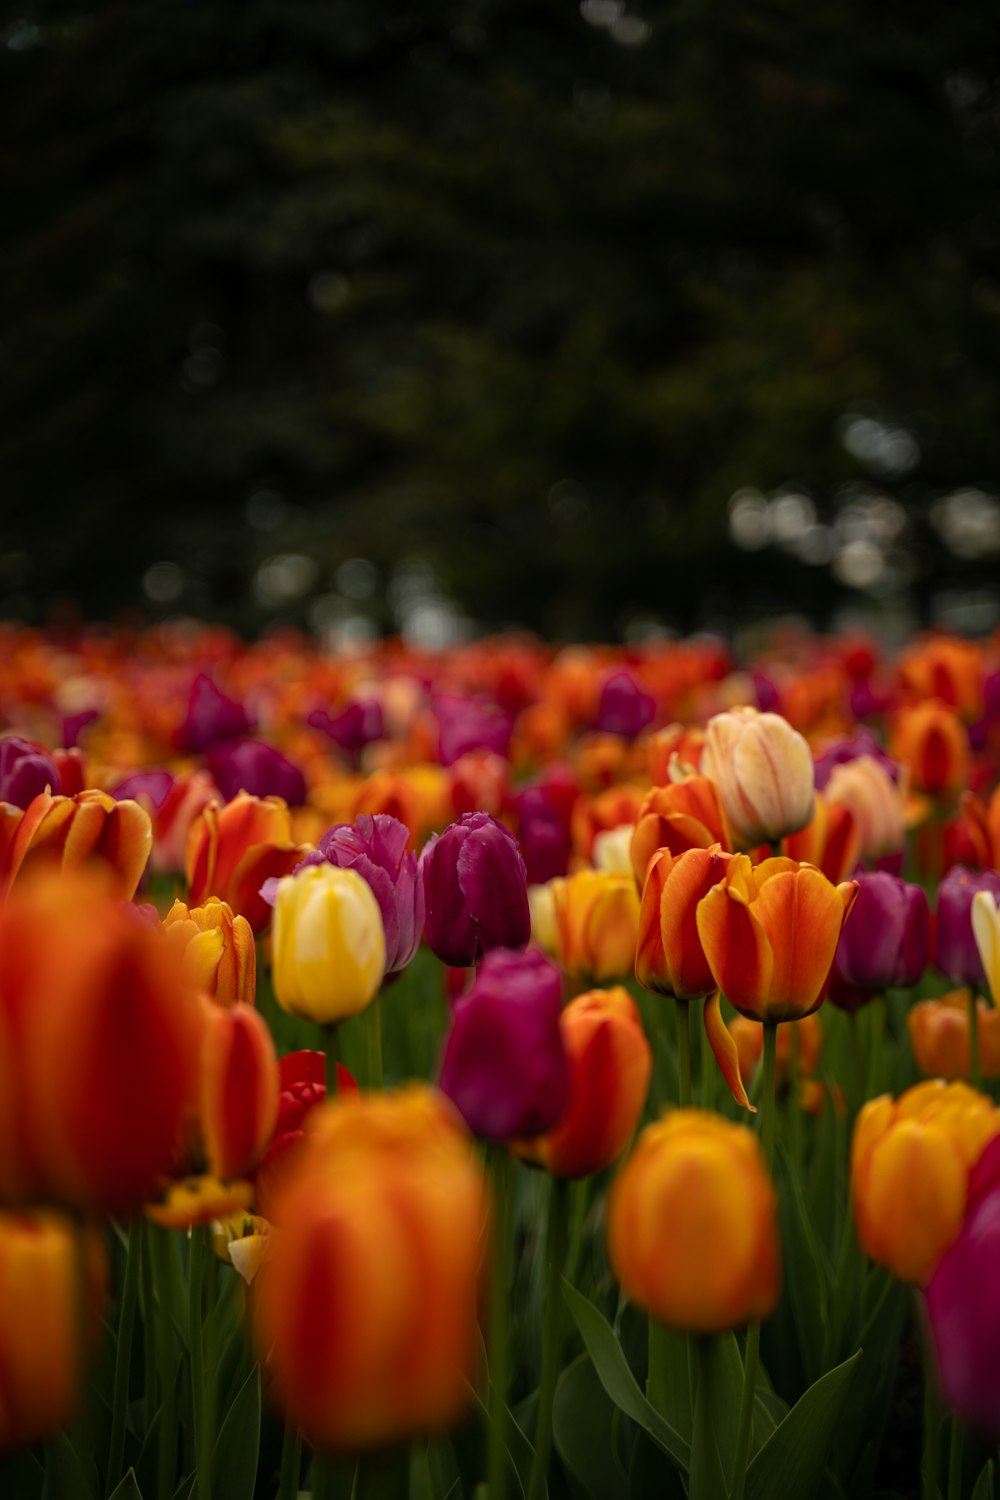 yellow and purple tulips in bloom during daytime